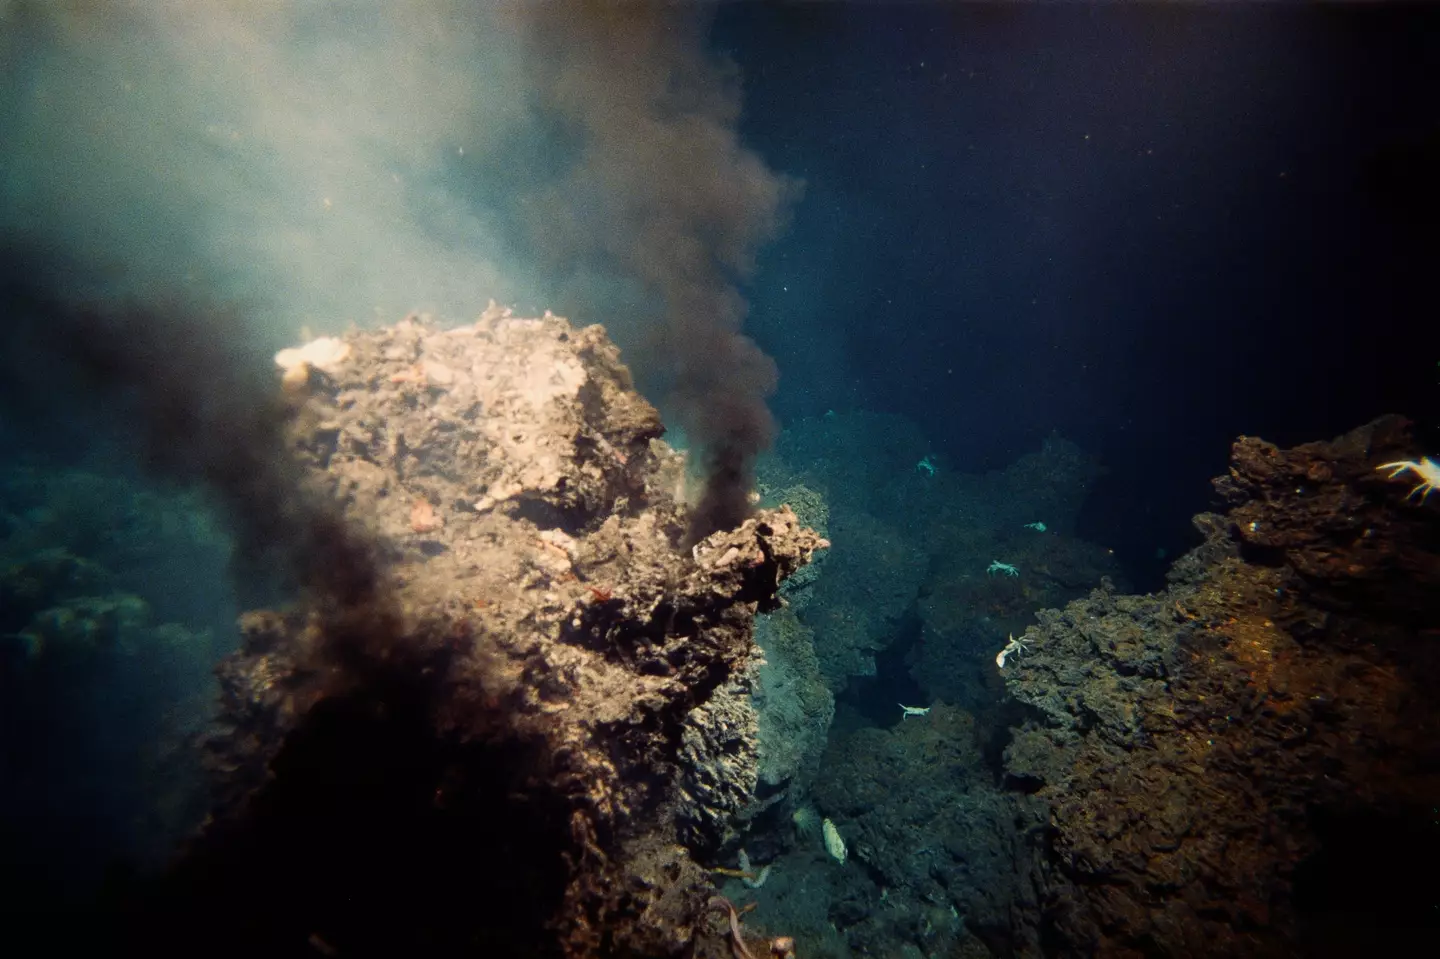 There are over 500 hydrothermal vents in the ocean.